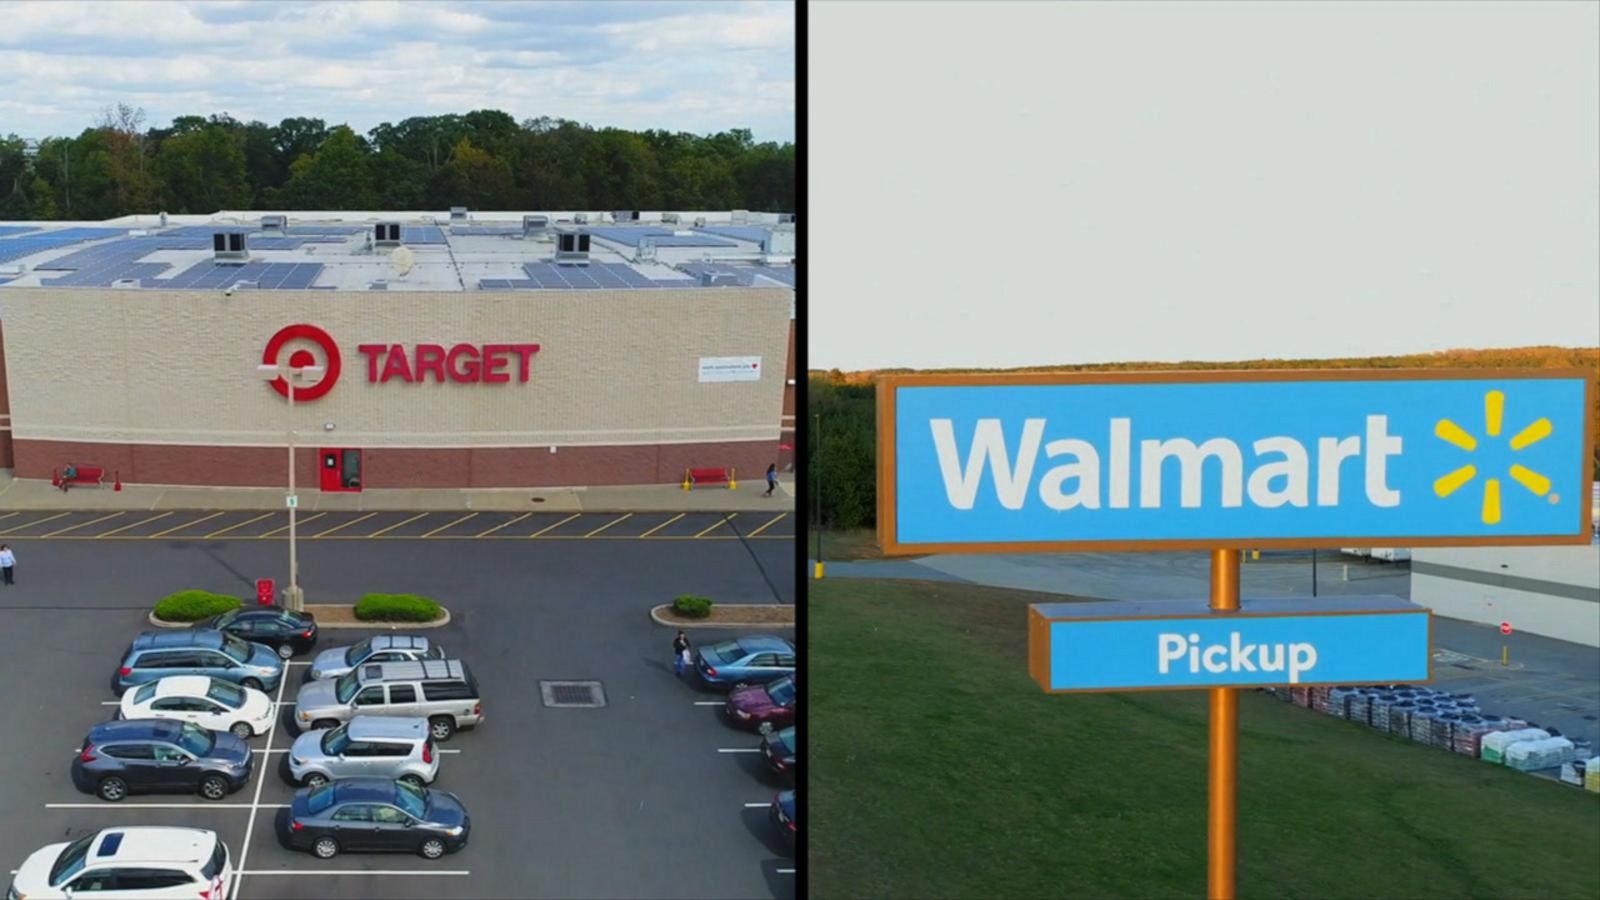 VIDEO: Walmart, Target dropped from national recycling program